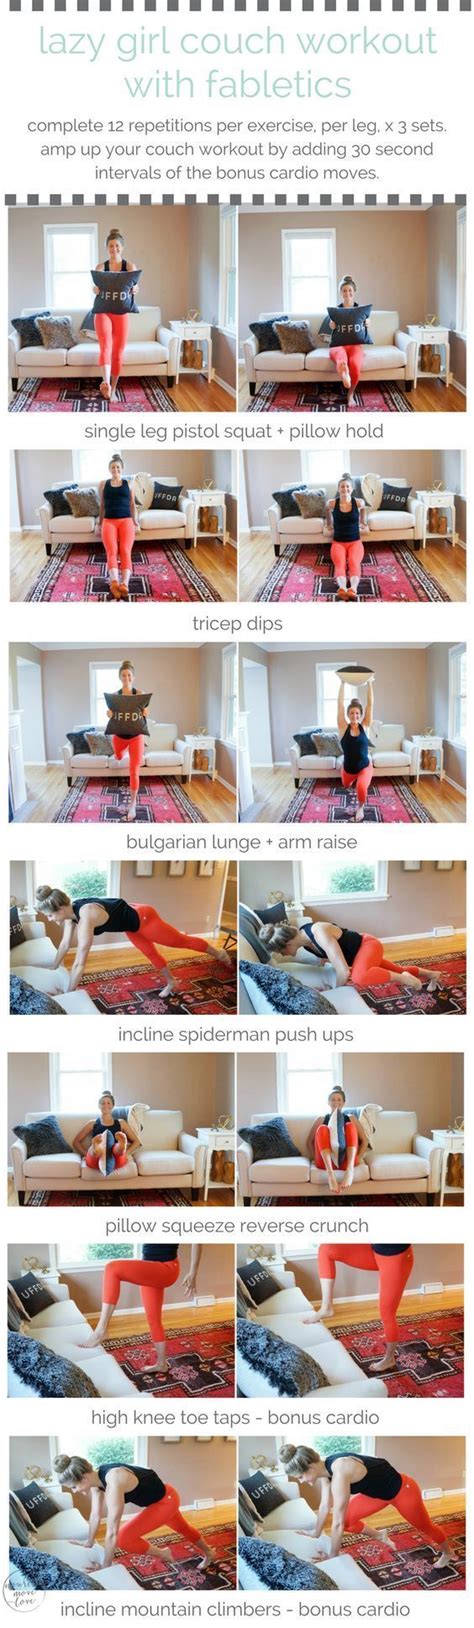 5 Workouts For When You Are Feeling Like The Ultimate Lazy Girl Couch Workout Circuit Workout